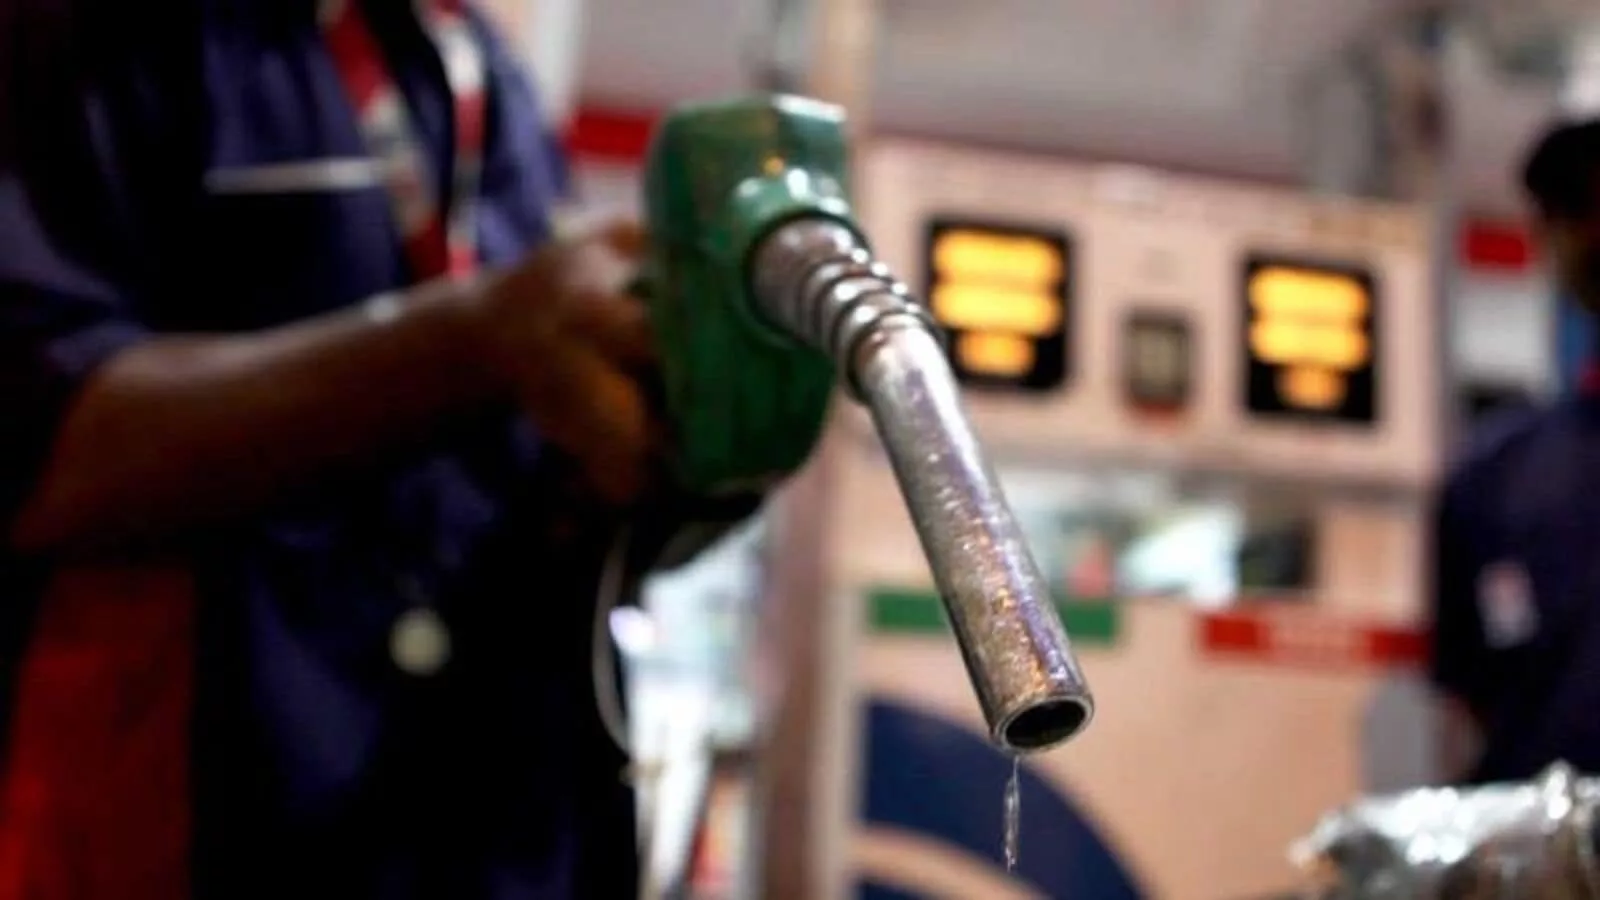 Petrol pumps in Delhi soon to check vehicle licence plates. Here is why